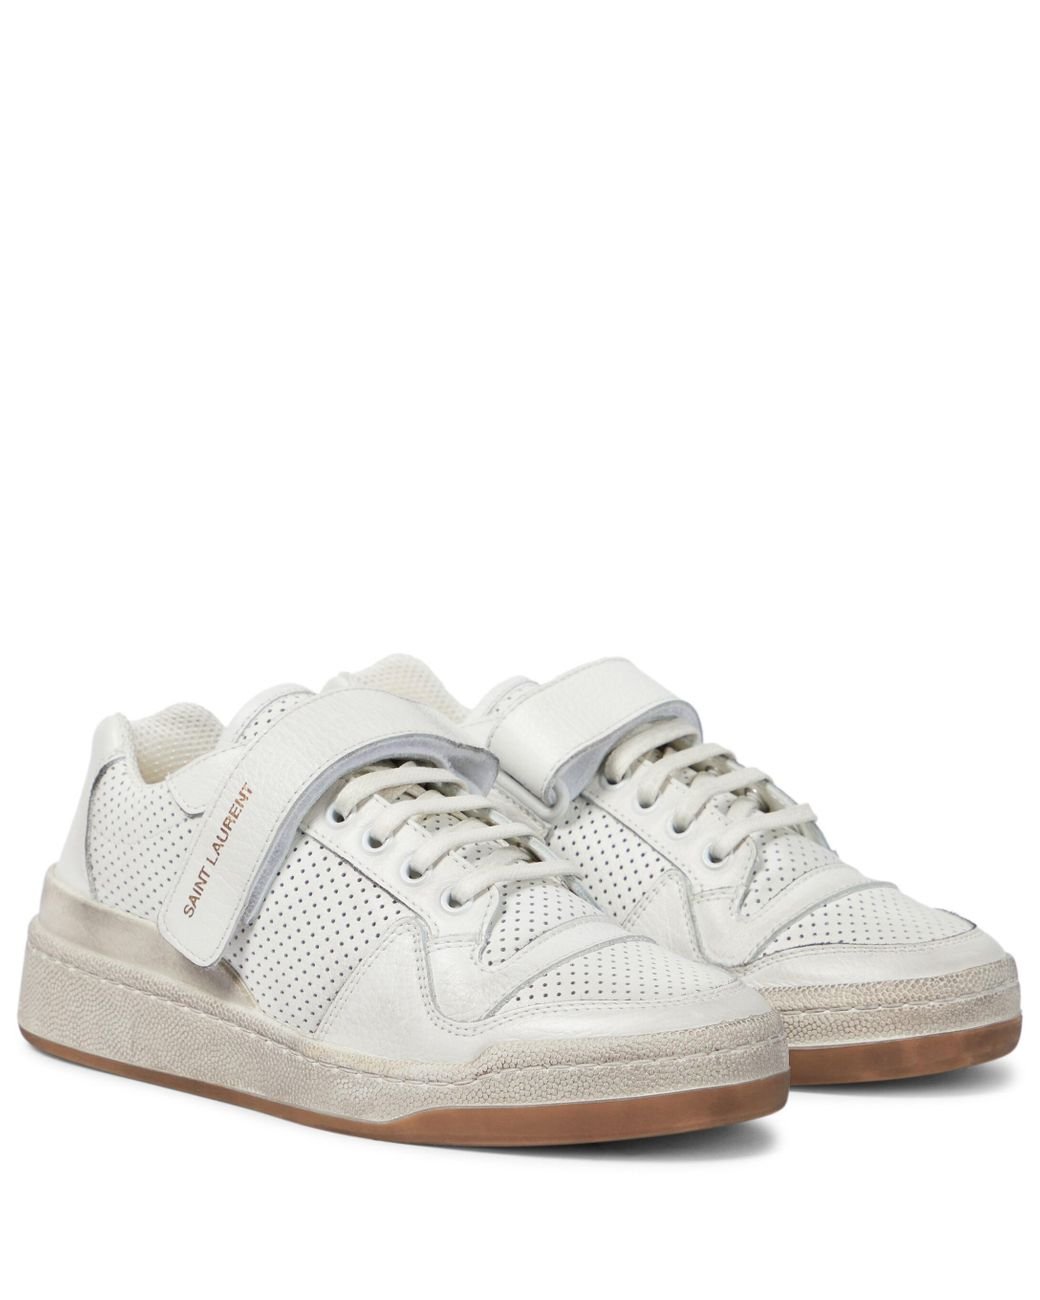 Saint Laurent Sl24 Leather Sneakers in White | Lyst